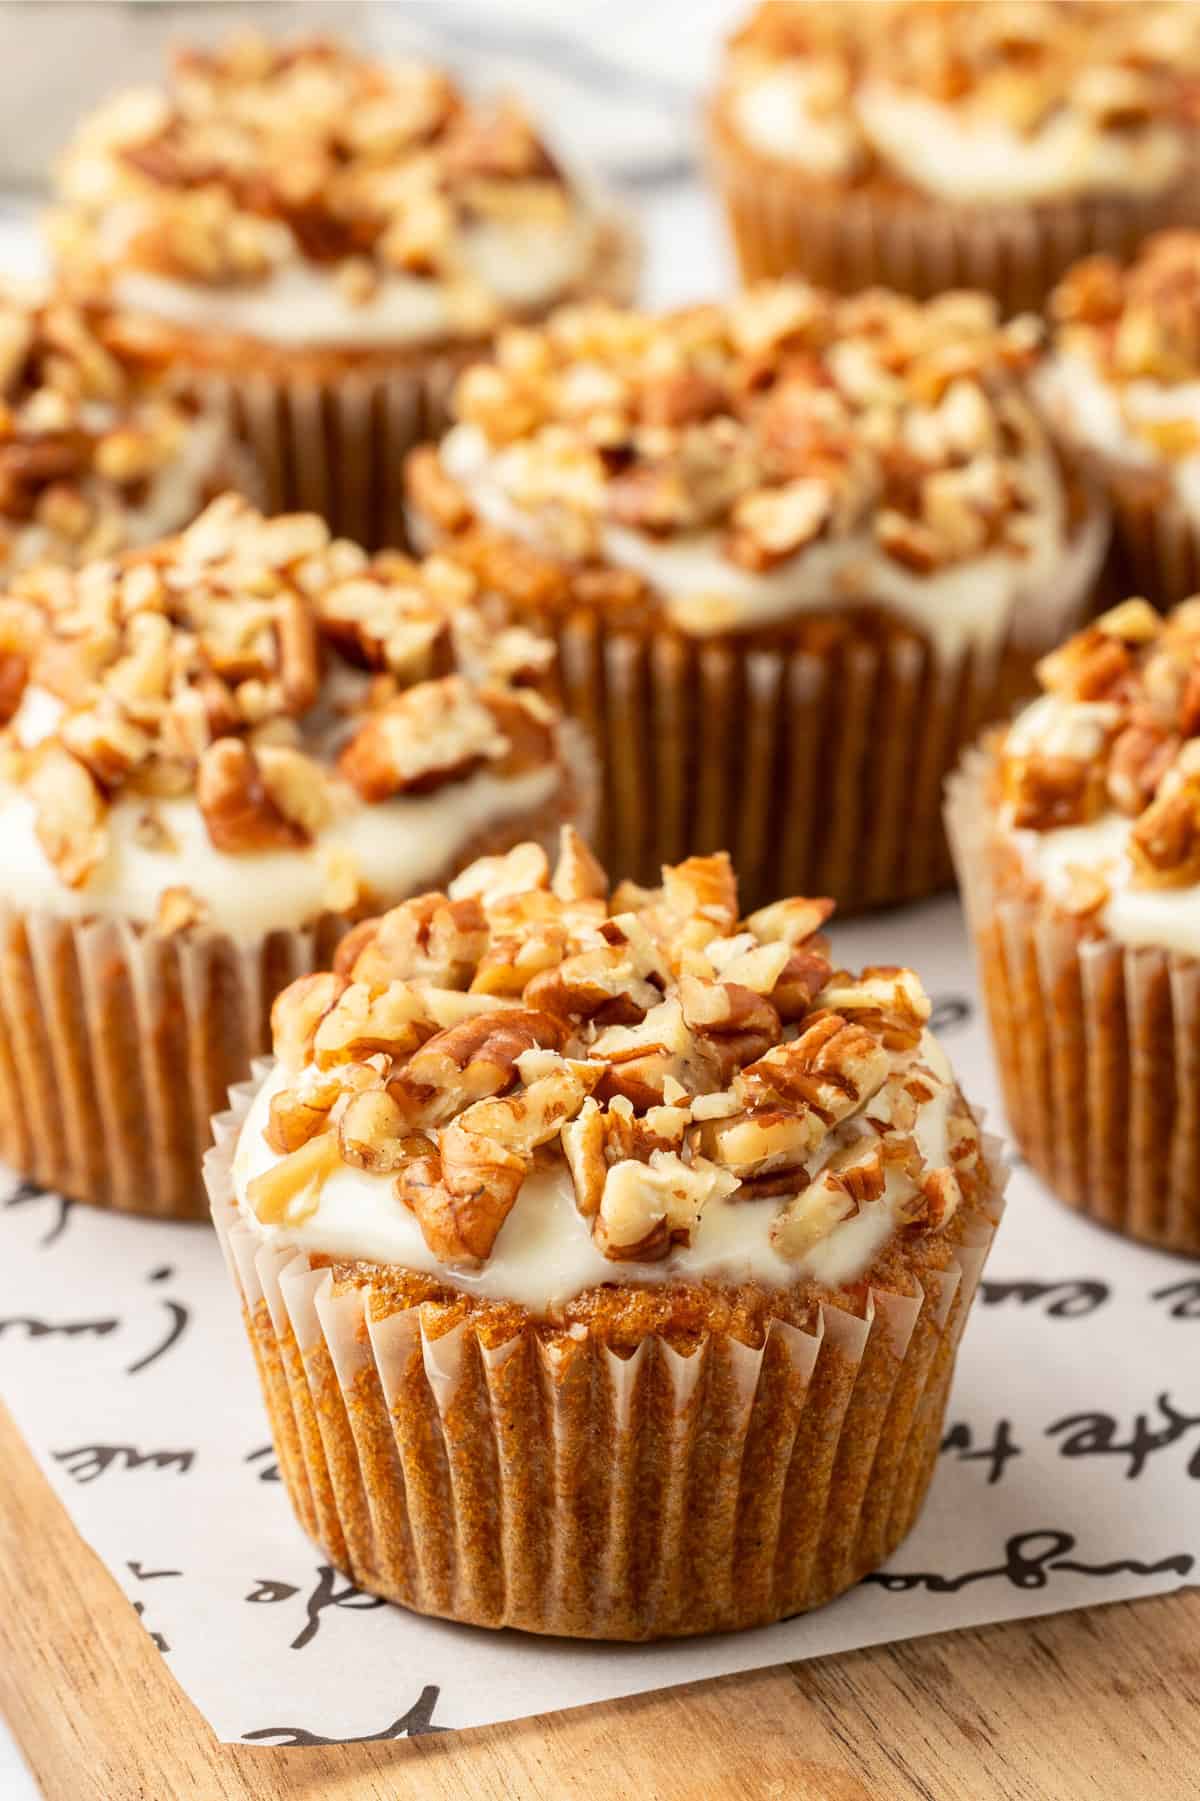 close up image of baked and decorated carrot cake muffins with cream cheese frosting.